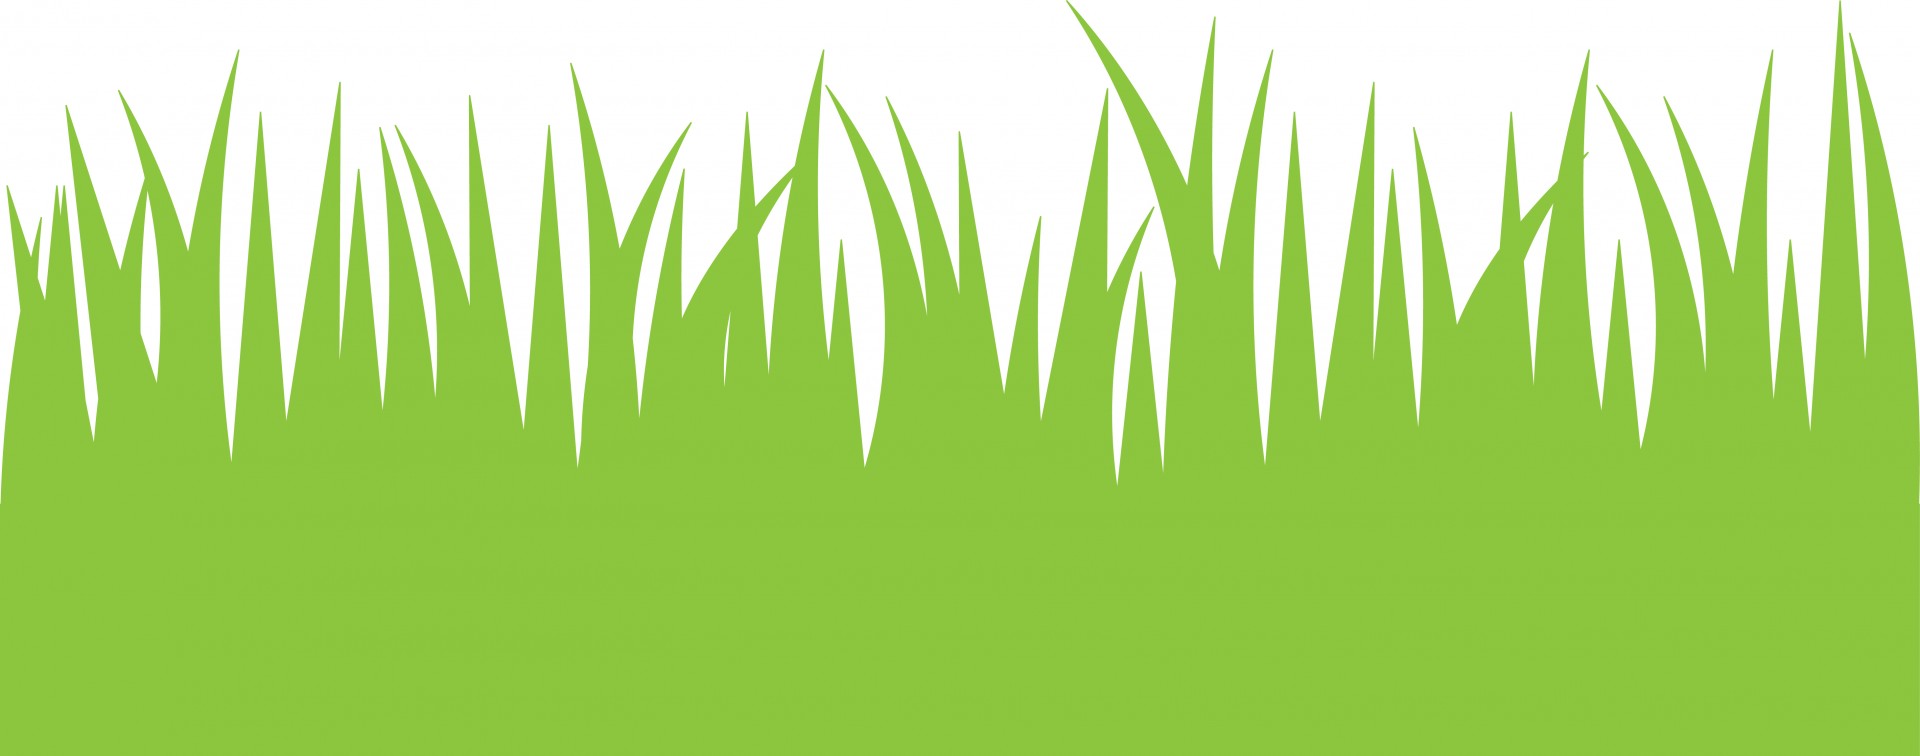 Free Grass Png Cartoon, Download Free Grass Png Cartoon png images ...